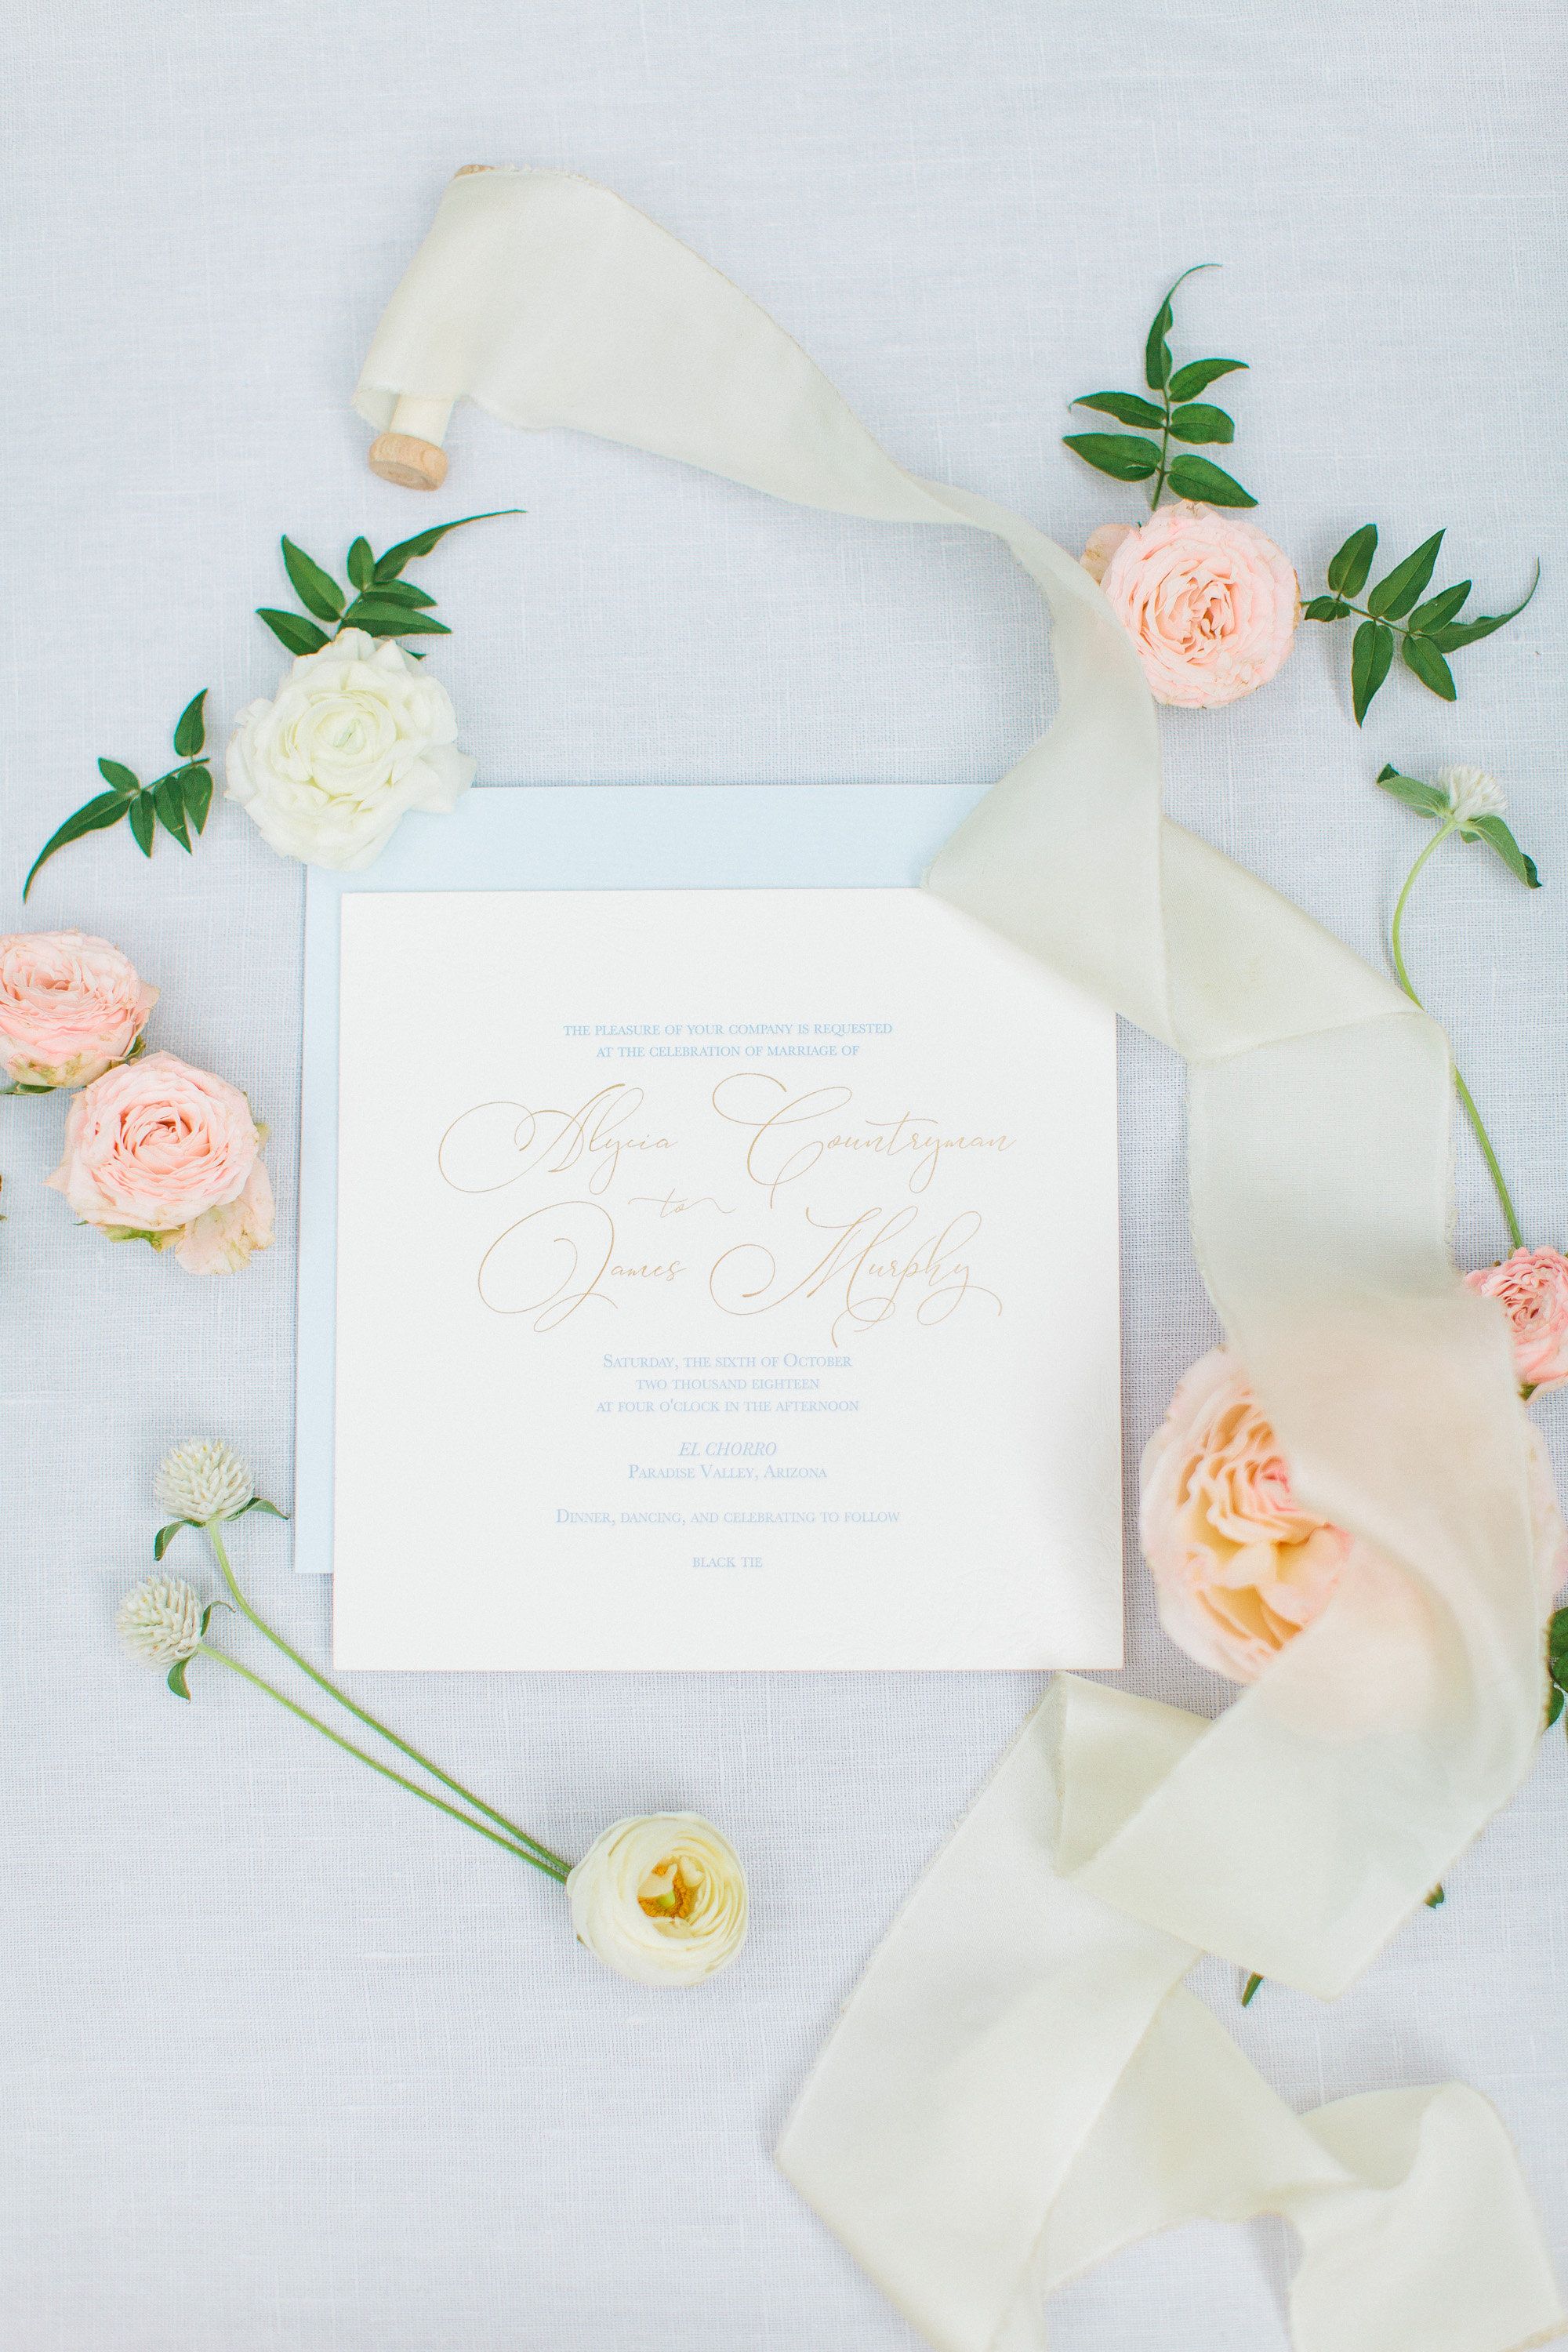 A custom wedding invite surrounded by flowers